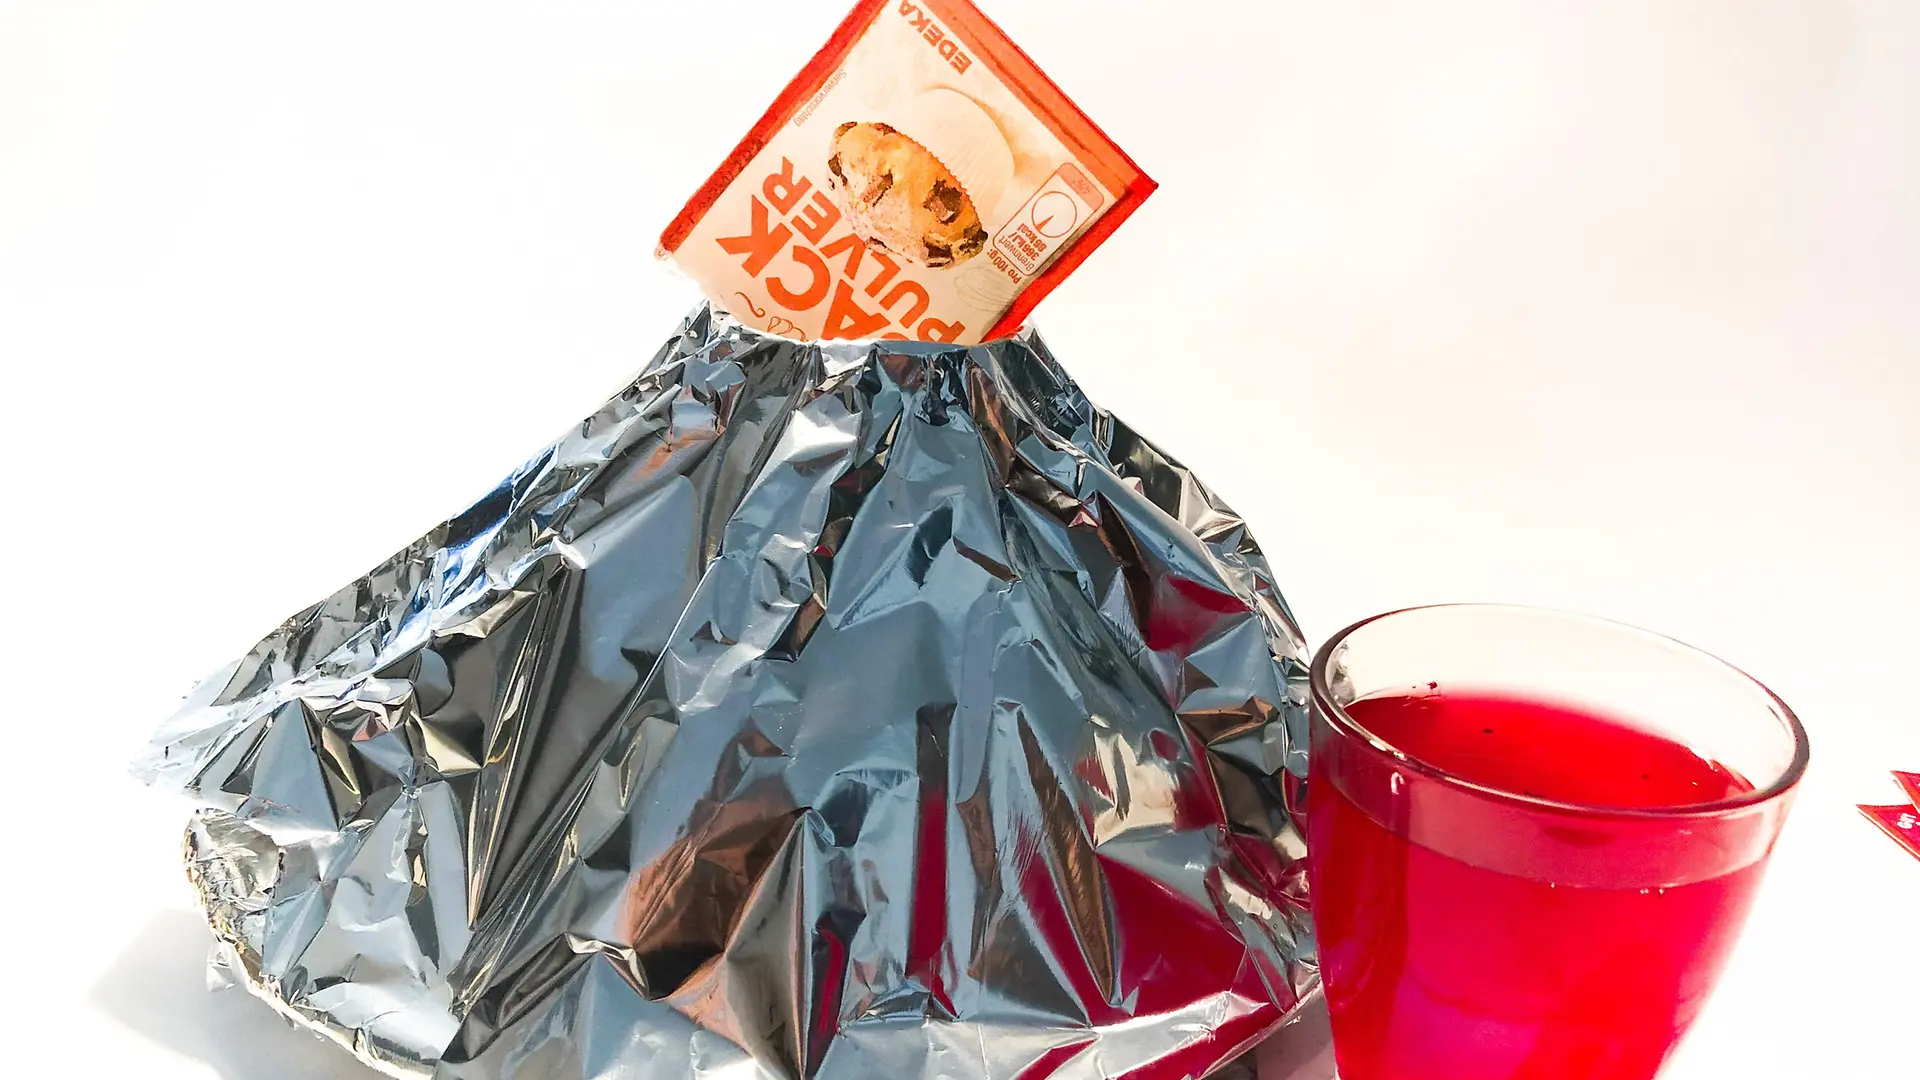 cone of aluminum foil with baking powder pack on top and glass filled with red water